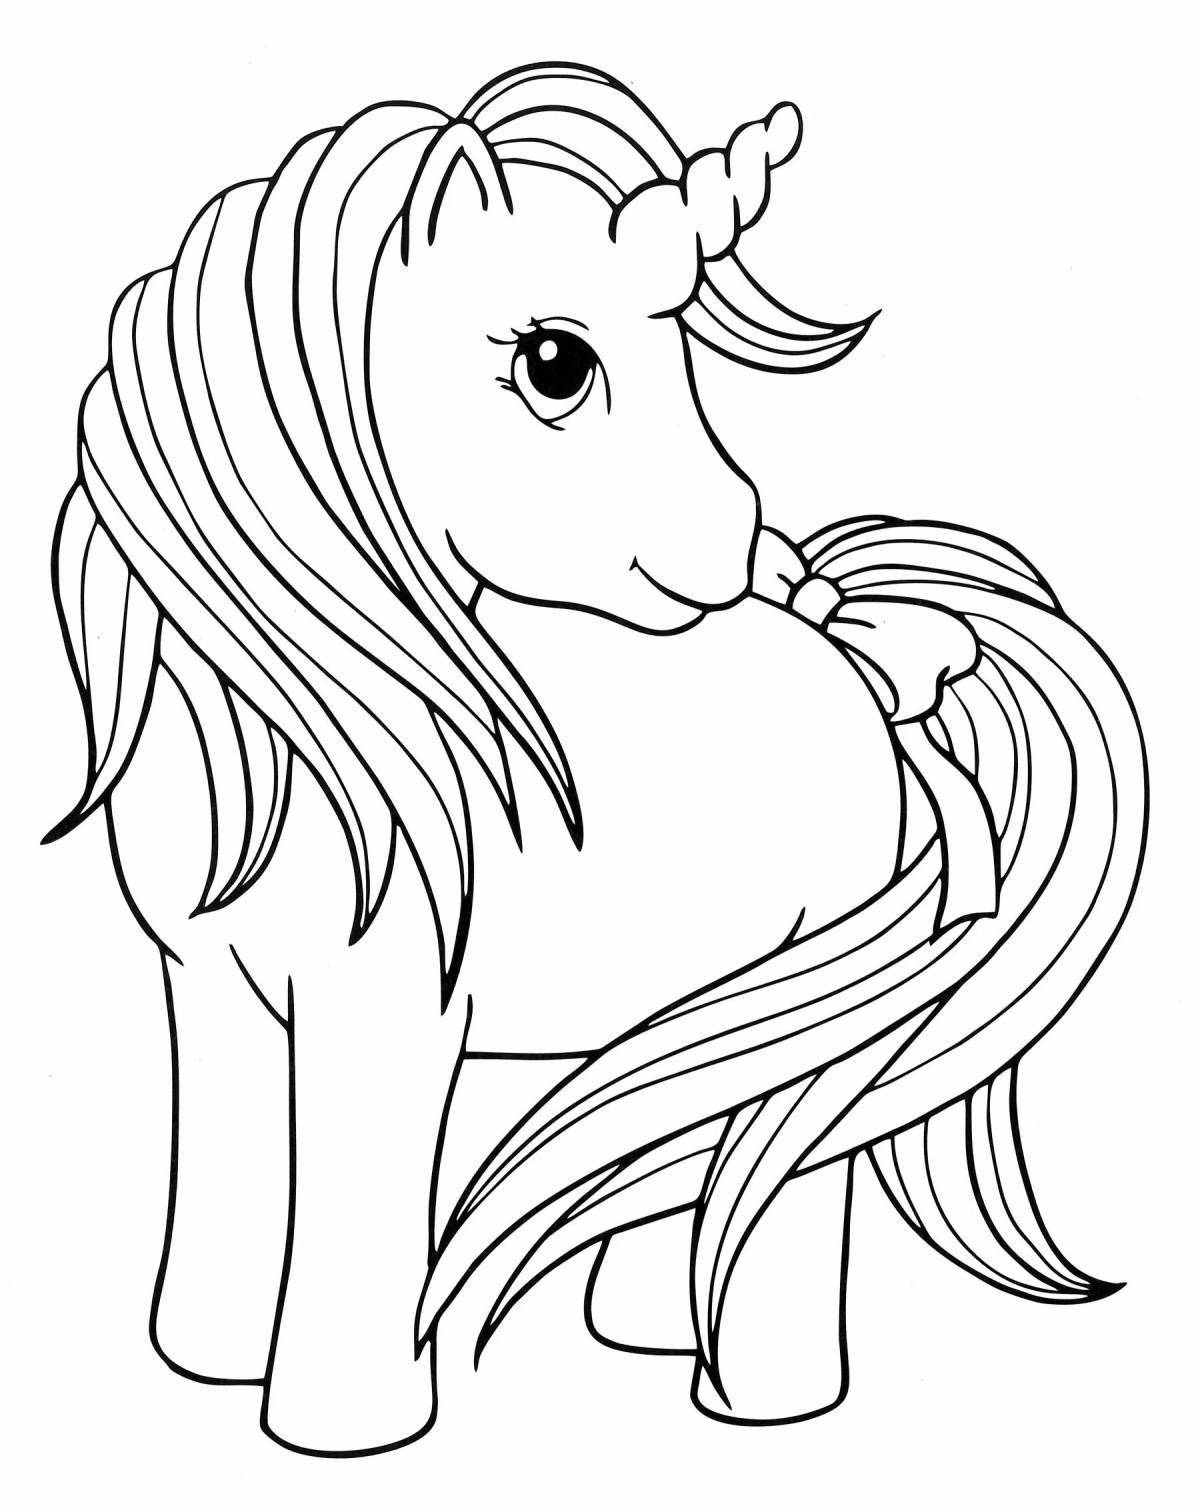 Glamor coloring for girls 7 years old unicorn